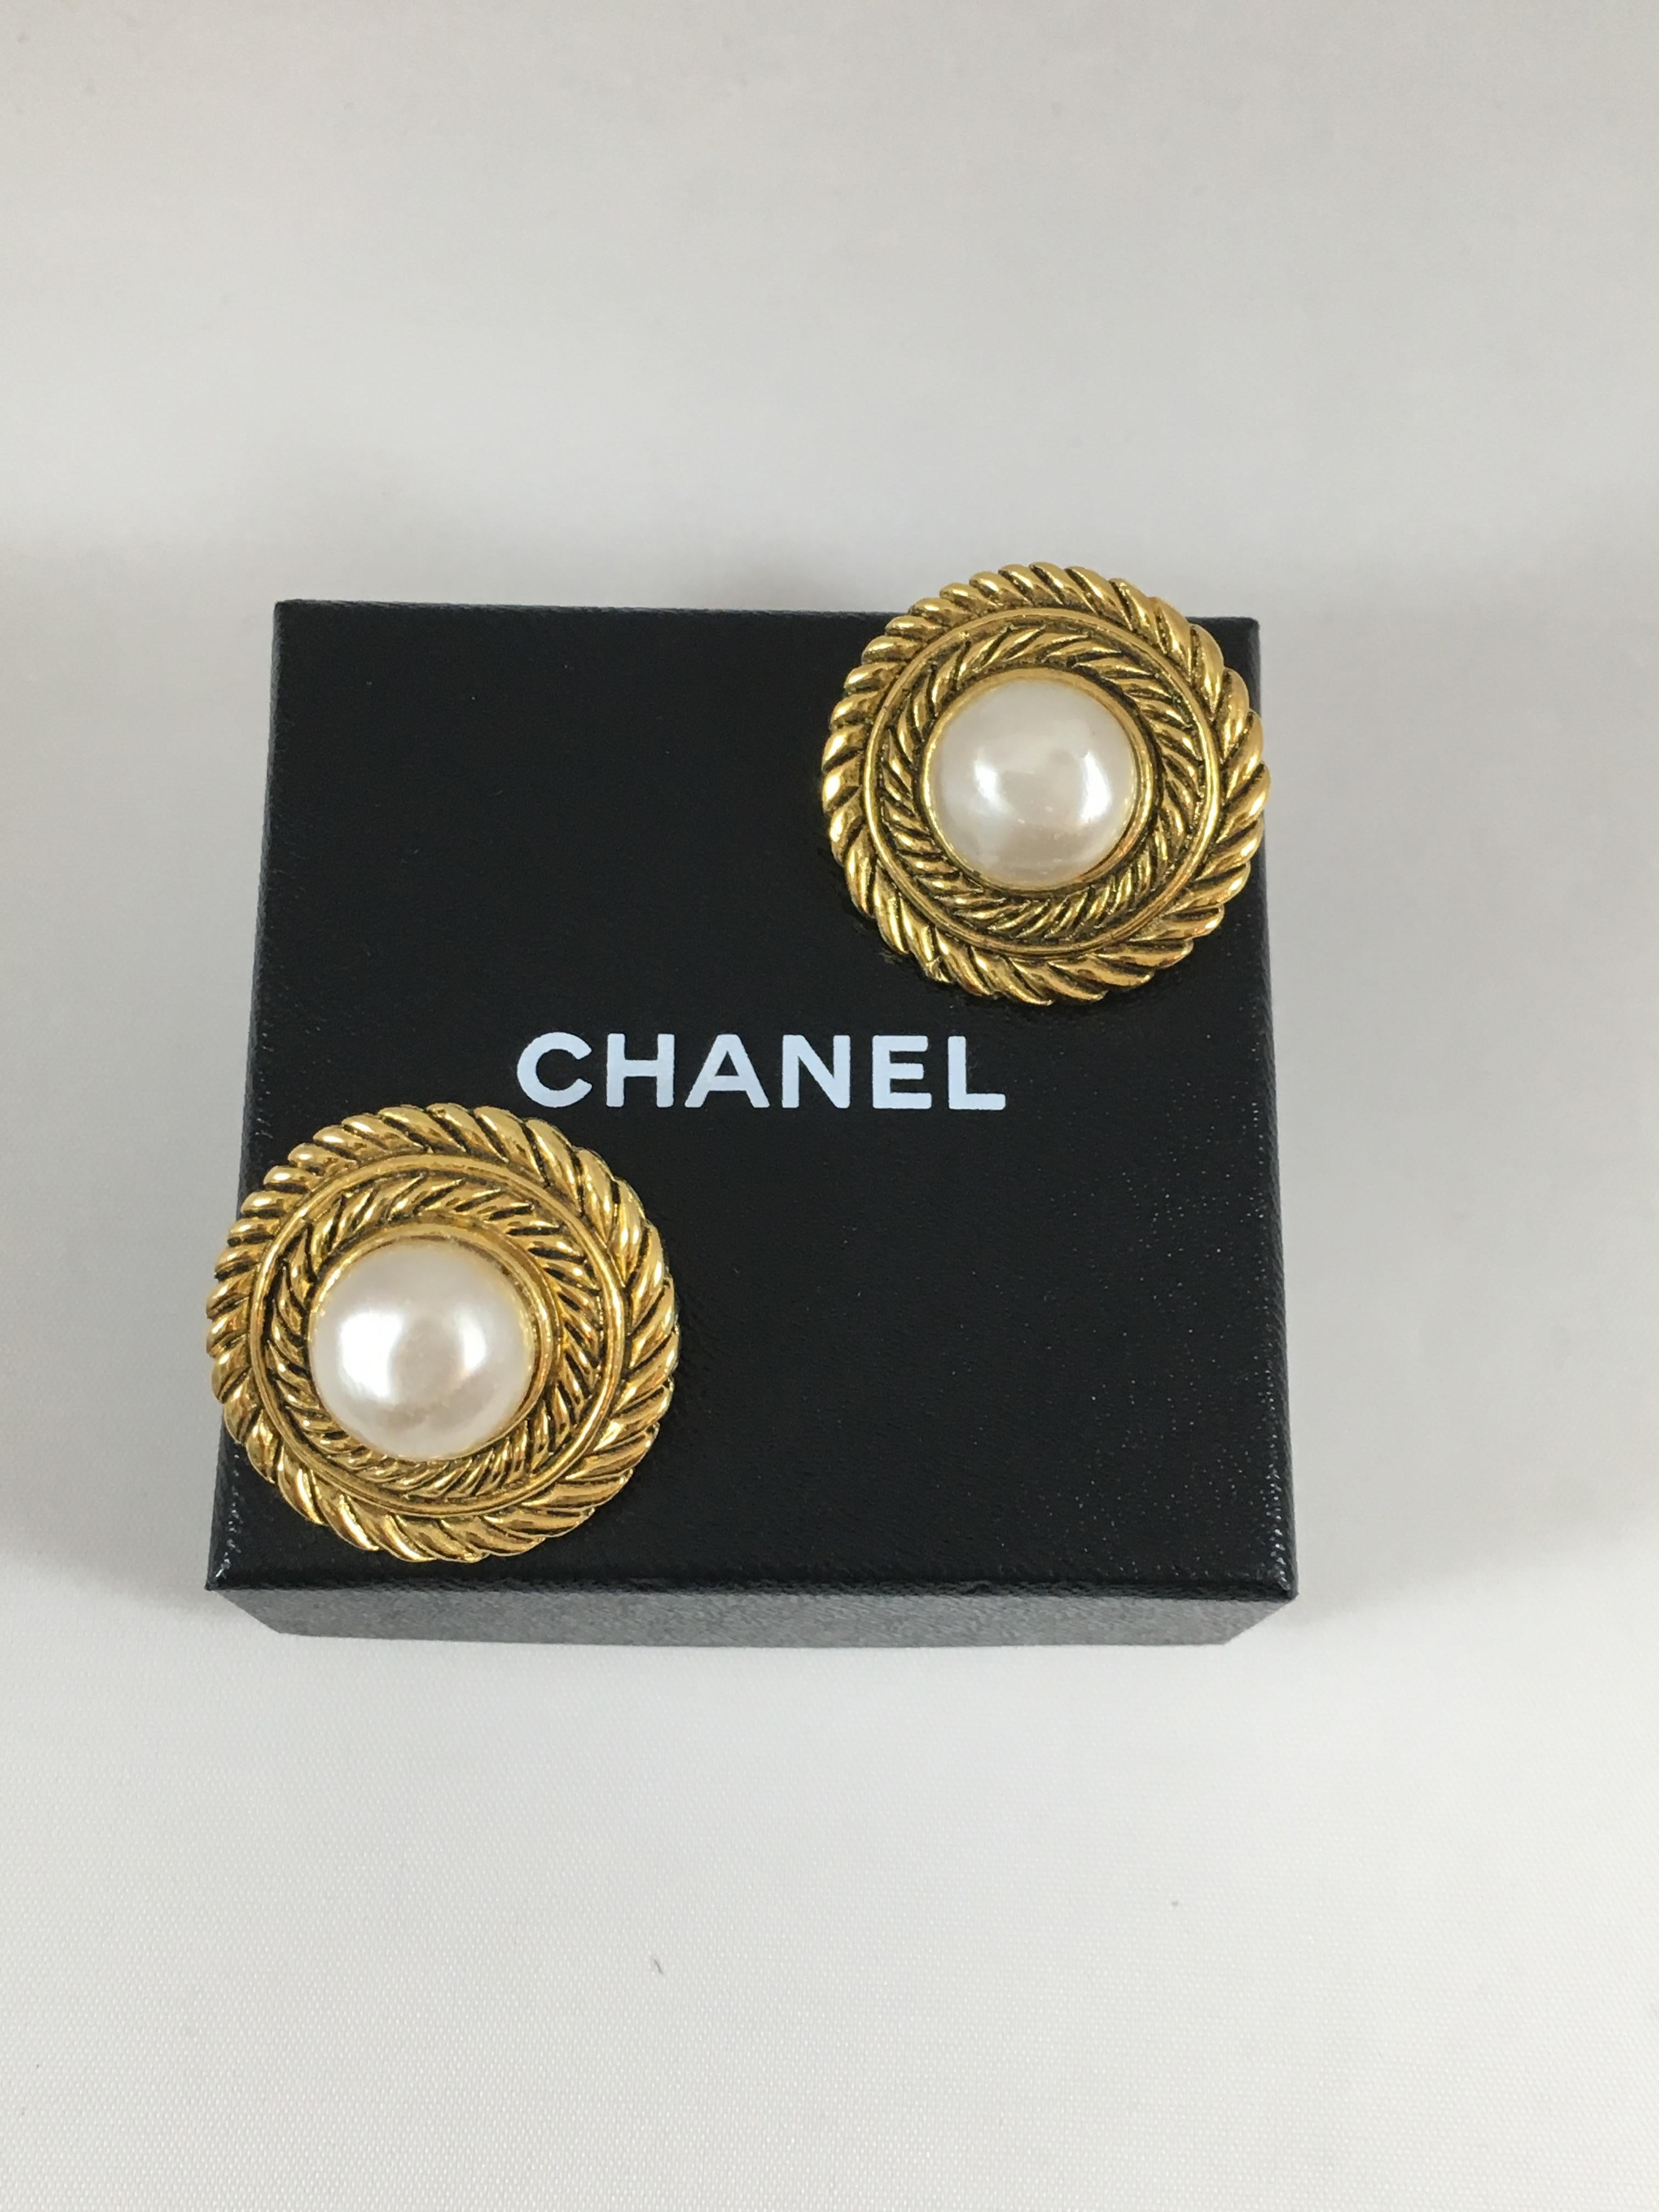 This is a fabulous pair of 1980s Chanel earrings in their original box. They are goldtone clip on earrings and feature a large round faux pearl in the center. They are beautifully made and are in excellent condition. They measure 1 1/8 inches in